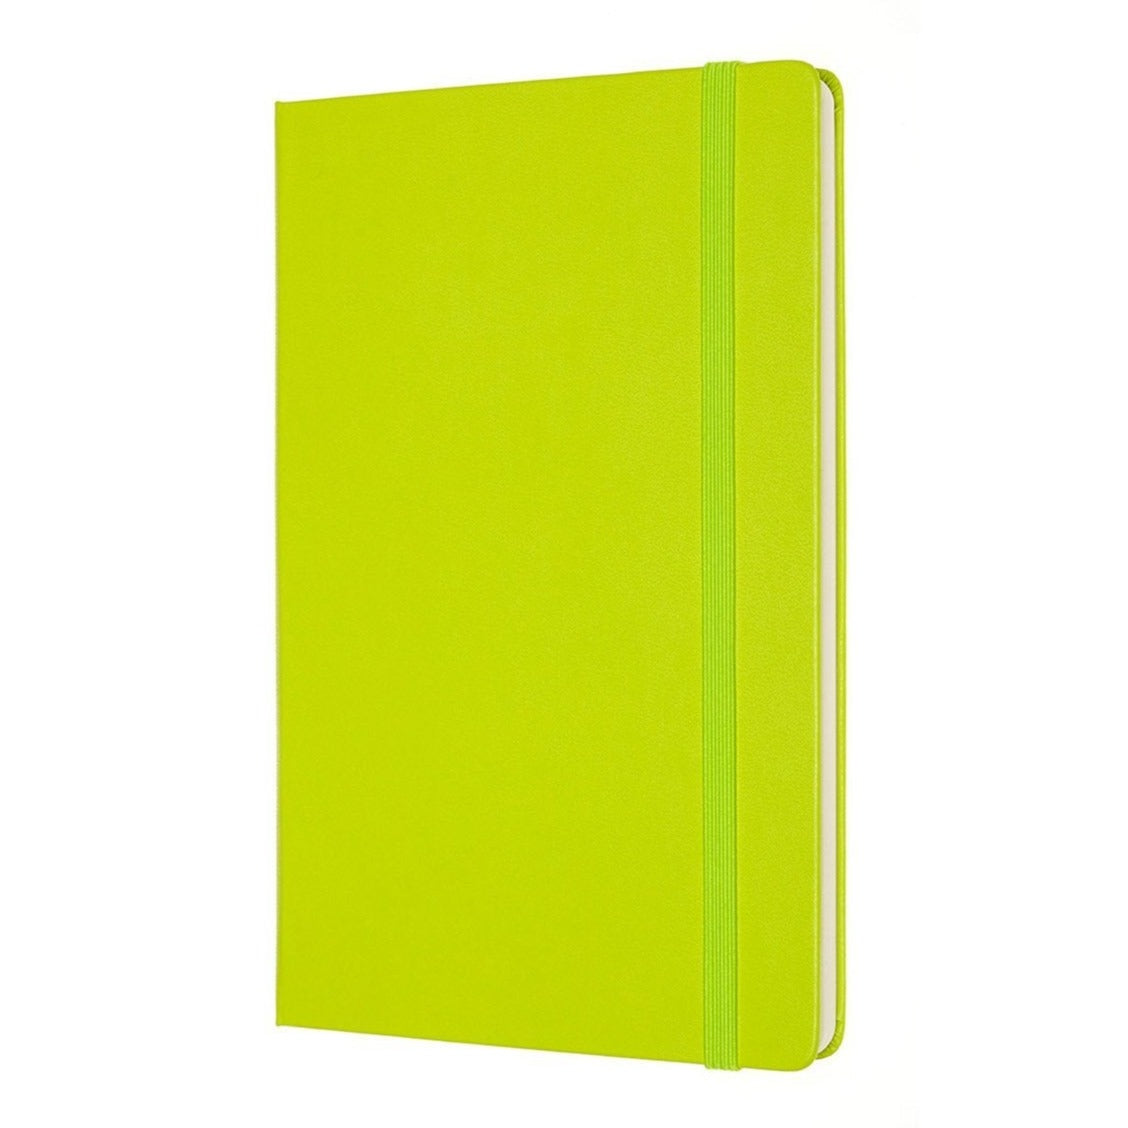 Moleskine Notebook Classic Large Light Green Hard Cover - Lined